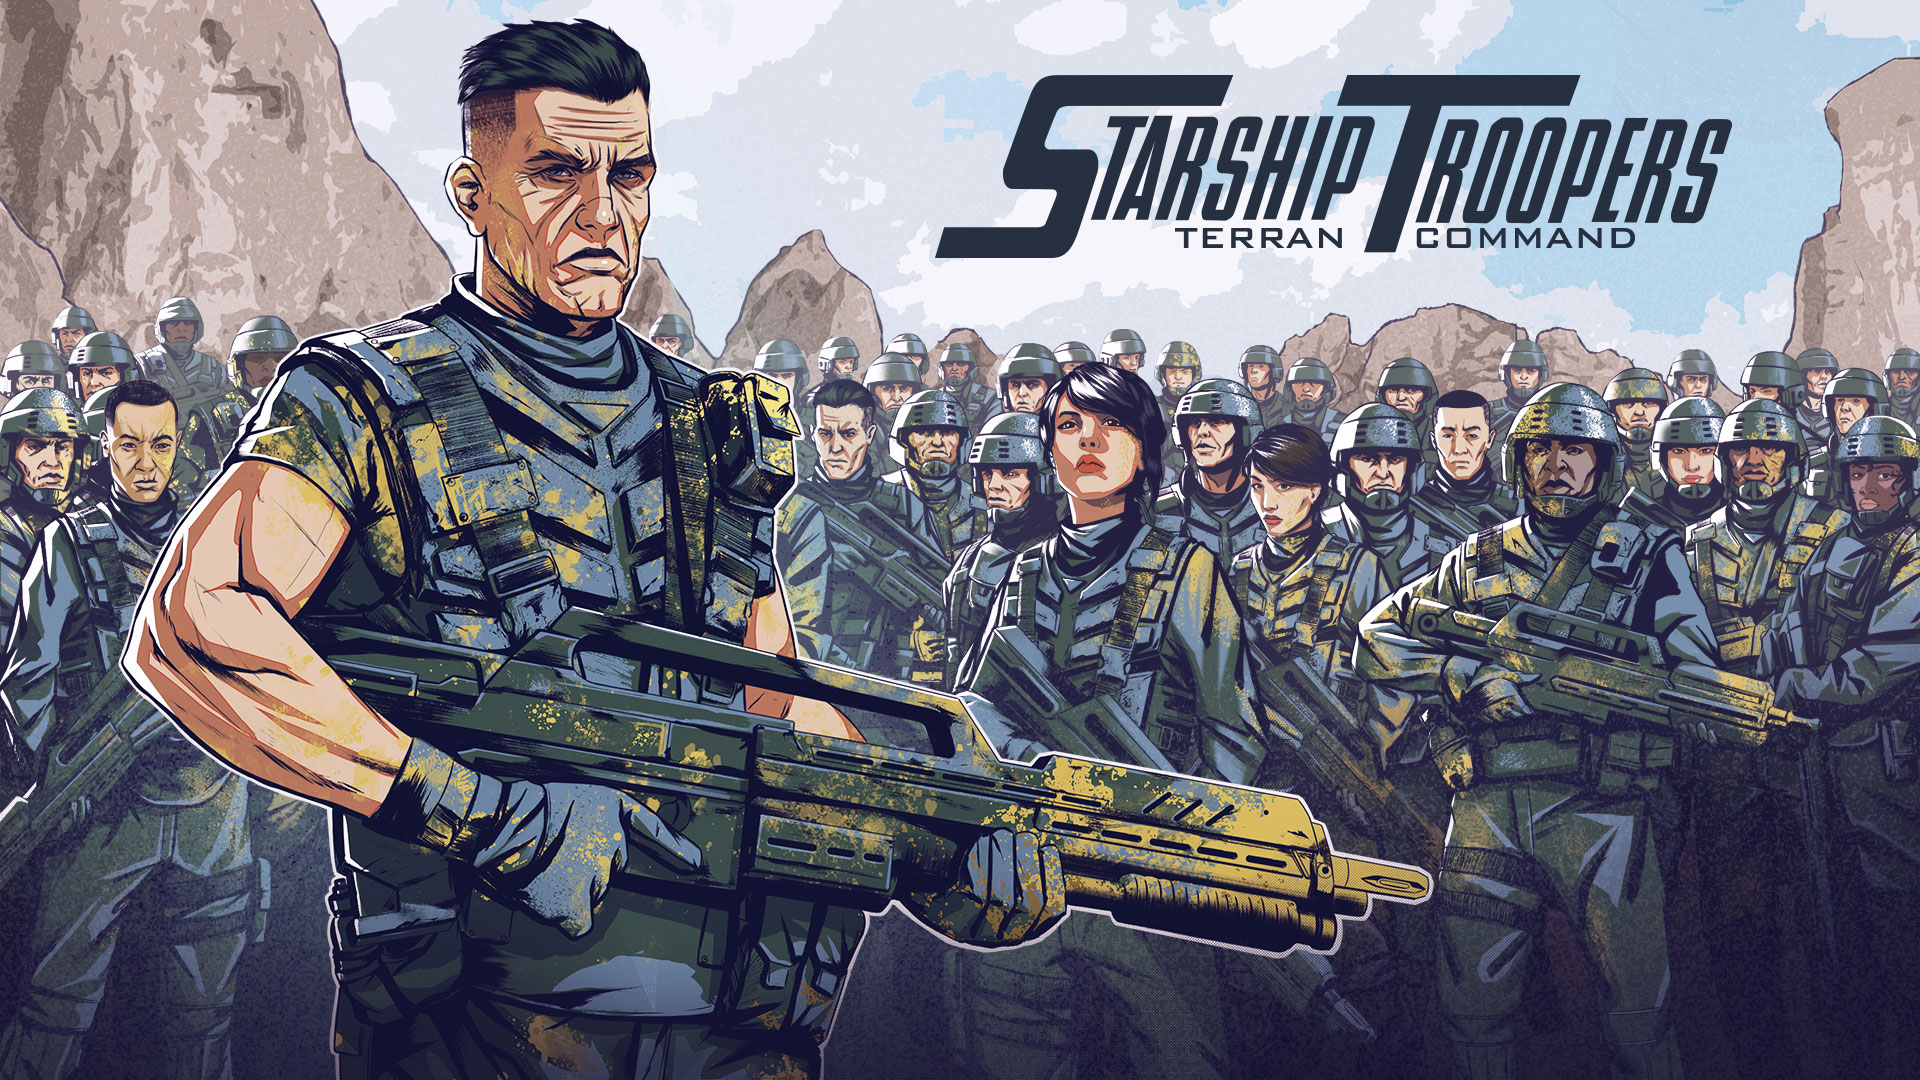 starship-troopers-terran-command-by-slitherine-games-have-you-played